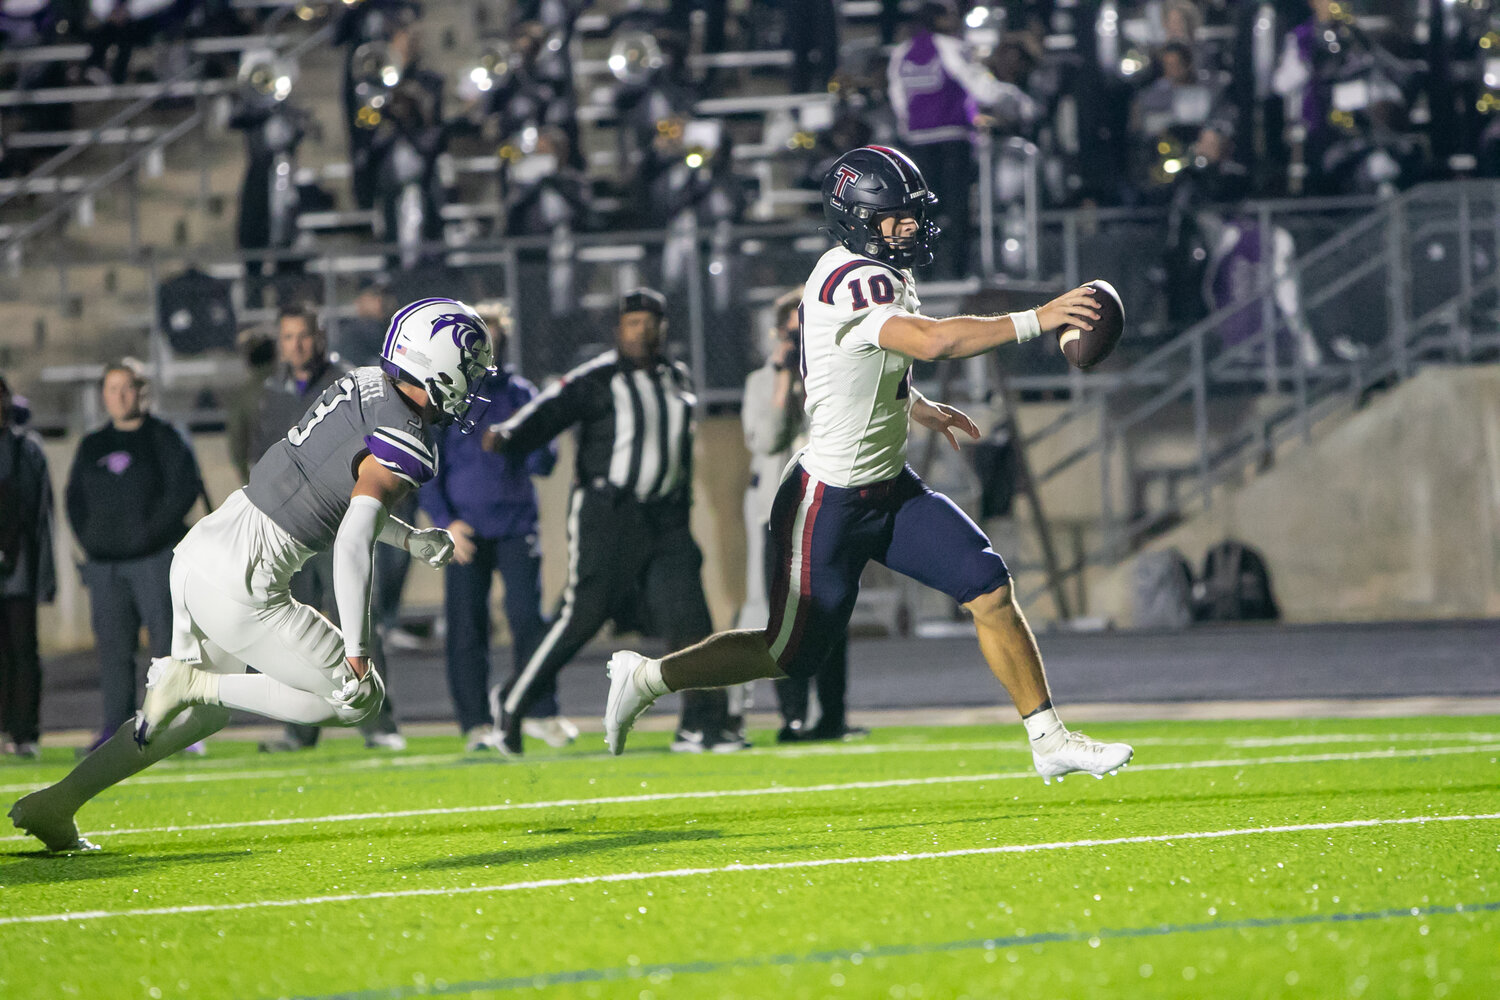 Wyatt Young runs into the endzone during Friday's game between Tompkins and Ridge Point at Hall Stadium.